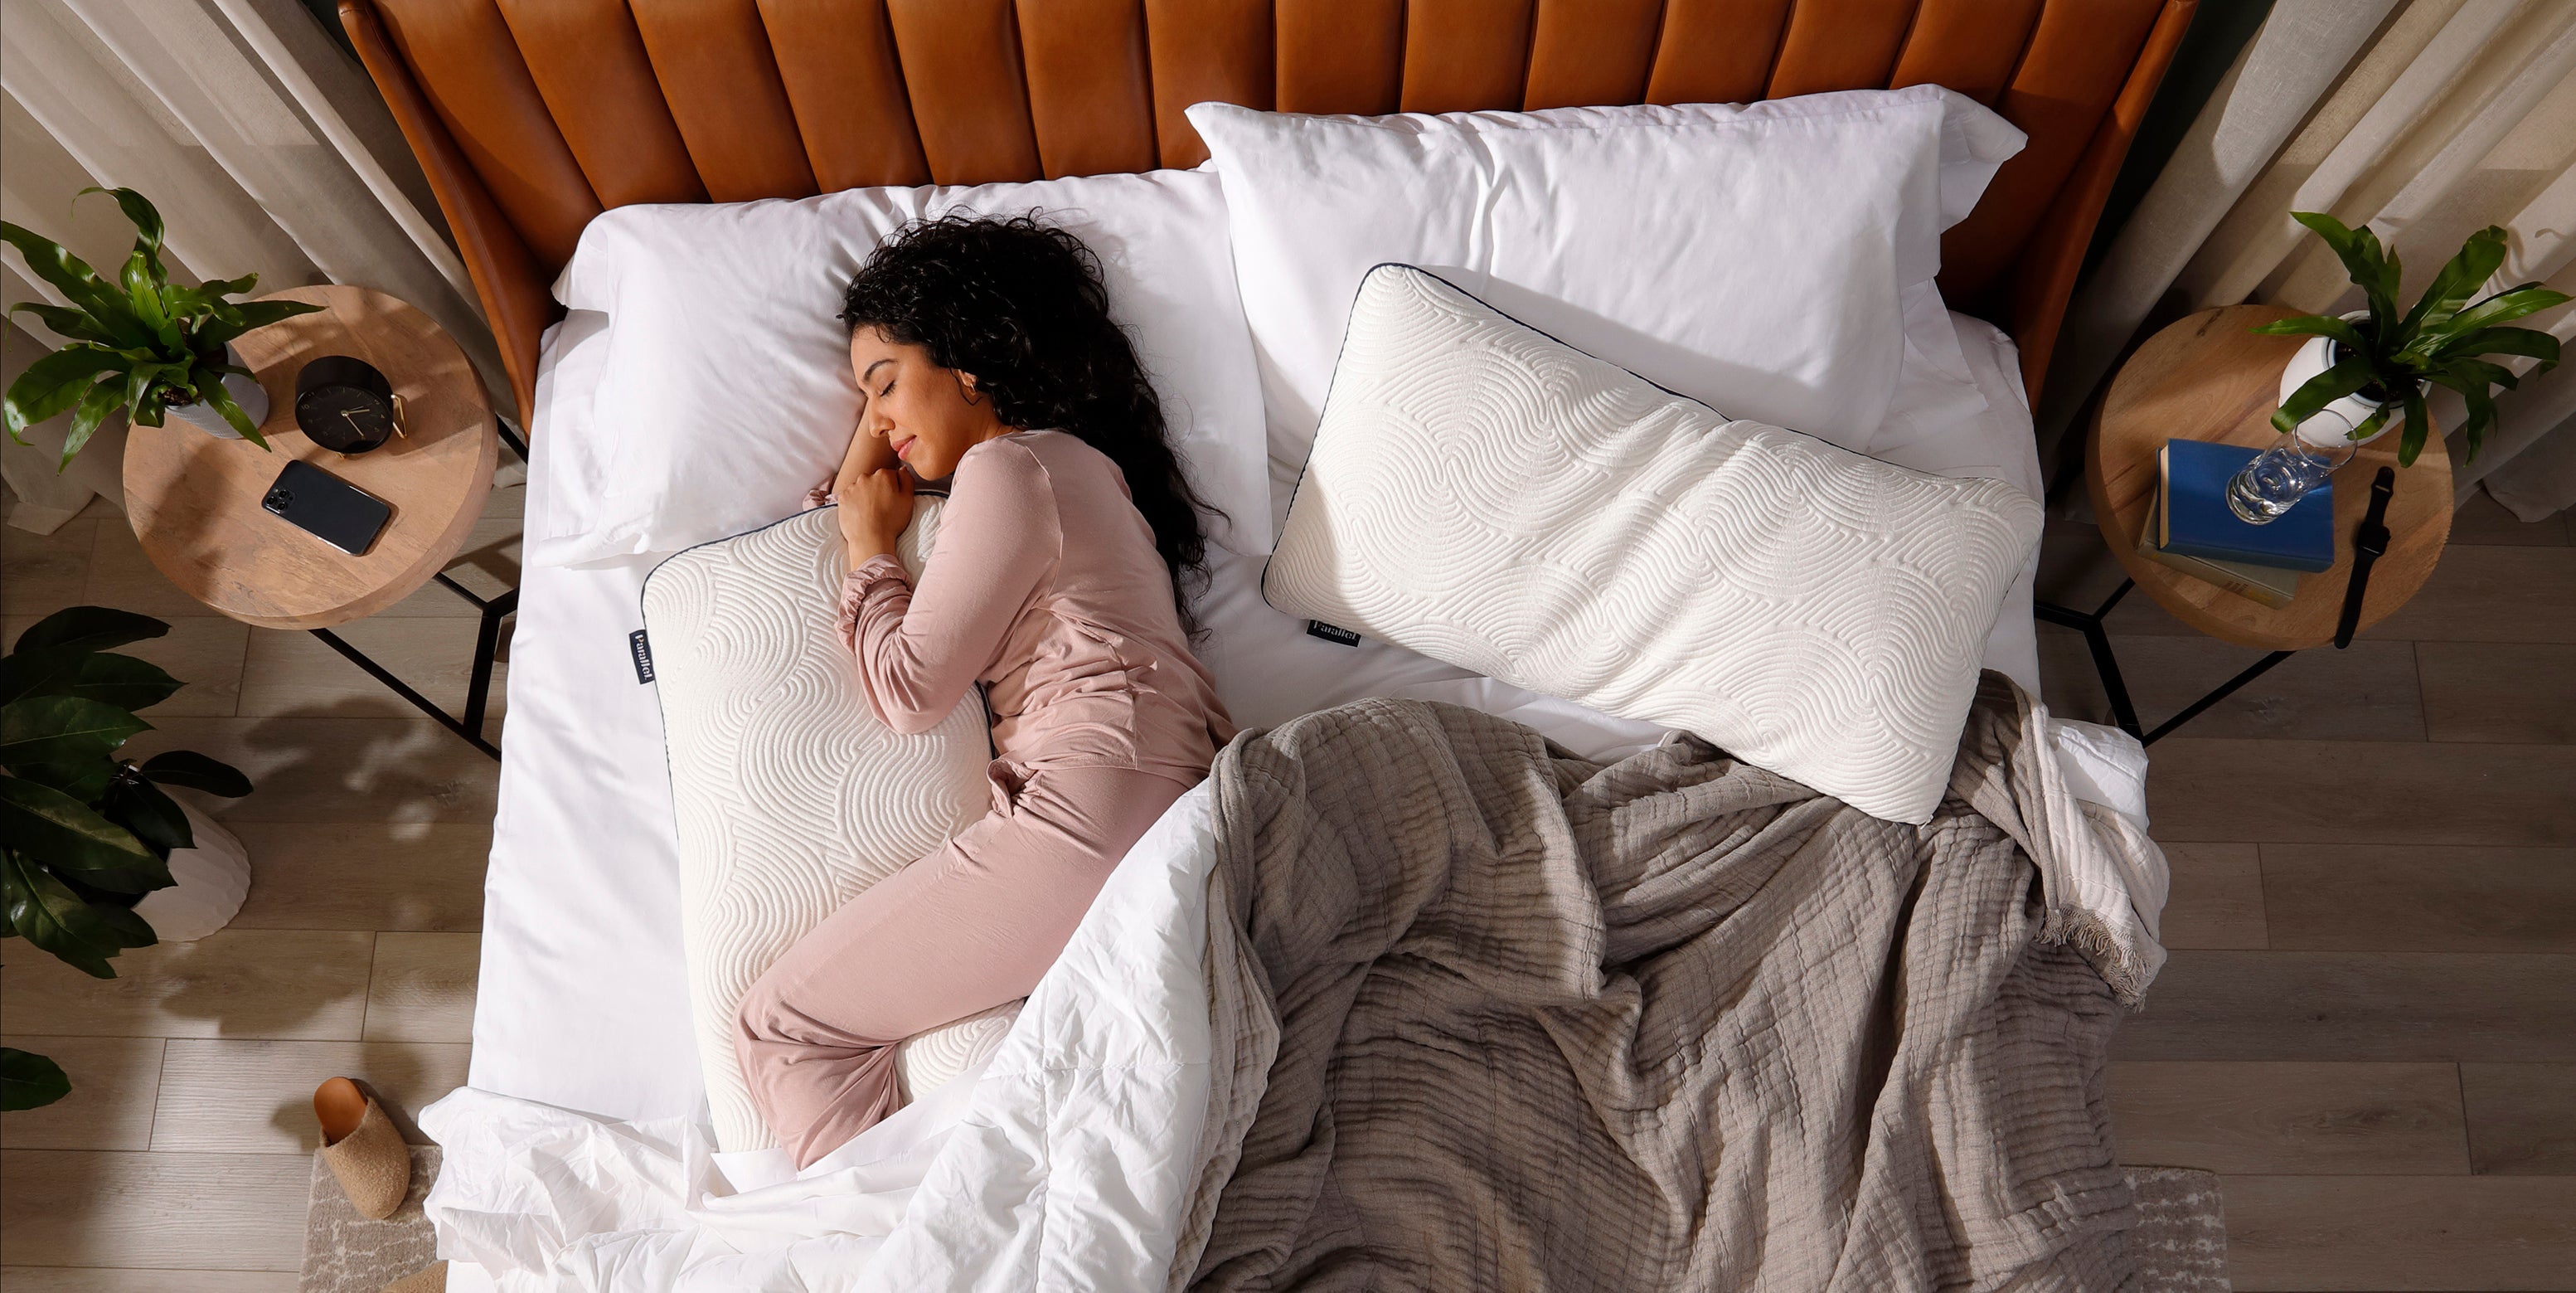 Hispanic woman sleeping in morning light with Parallel Pillow between knees